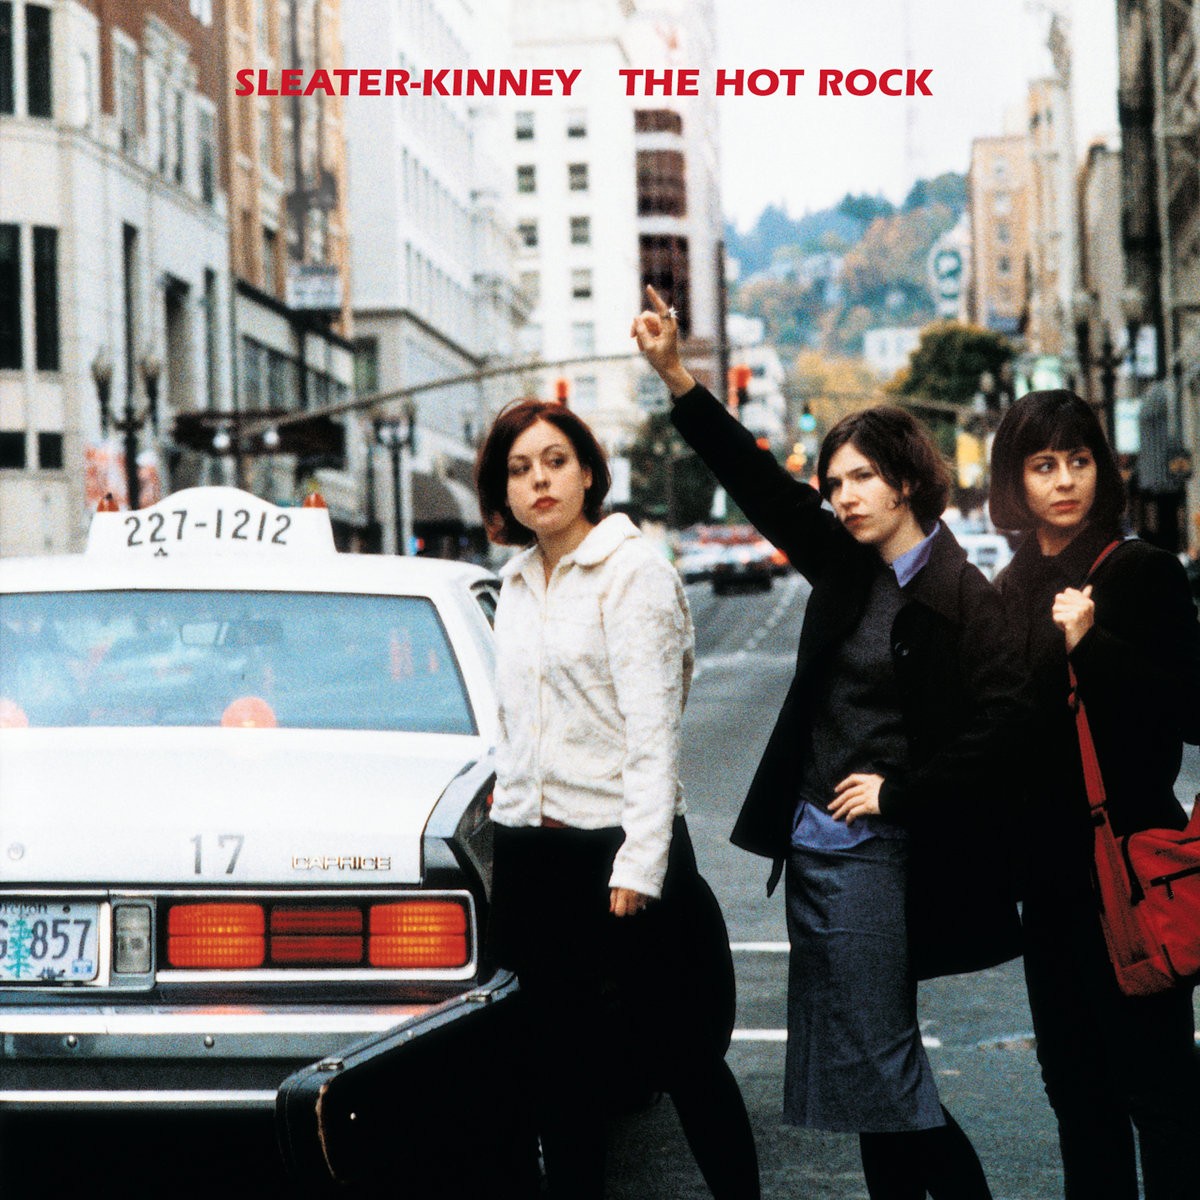 The Hot Rock by Sleater-Kinney